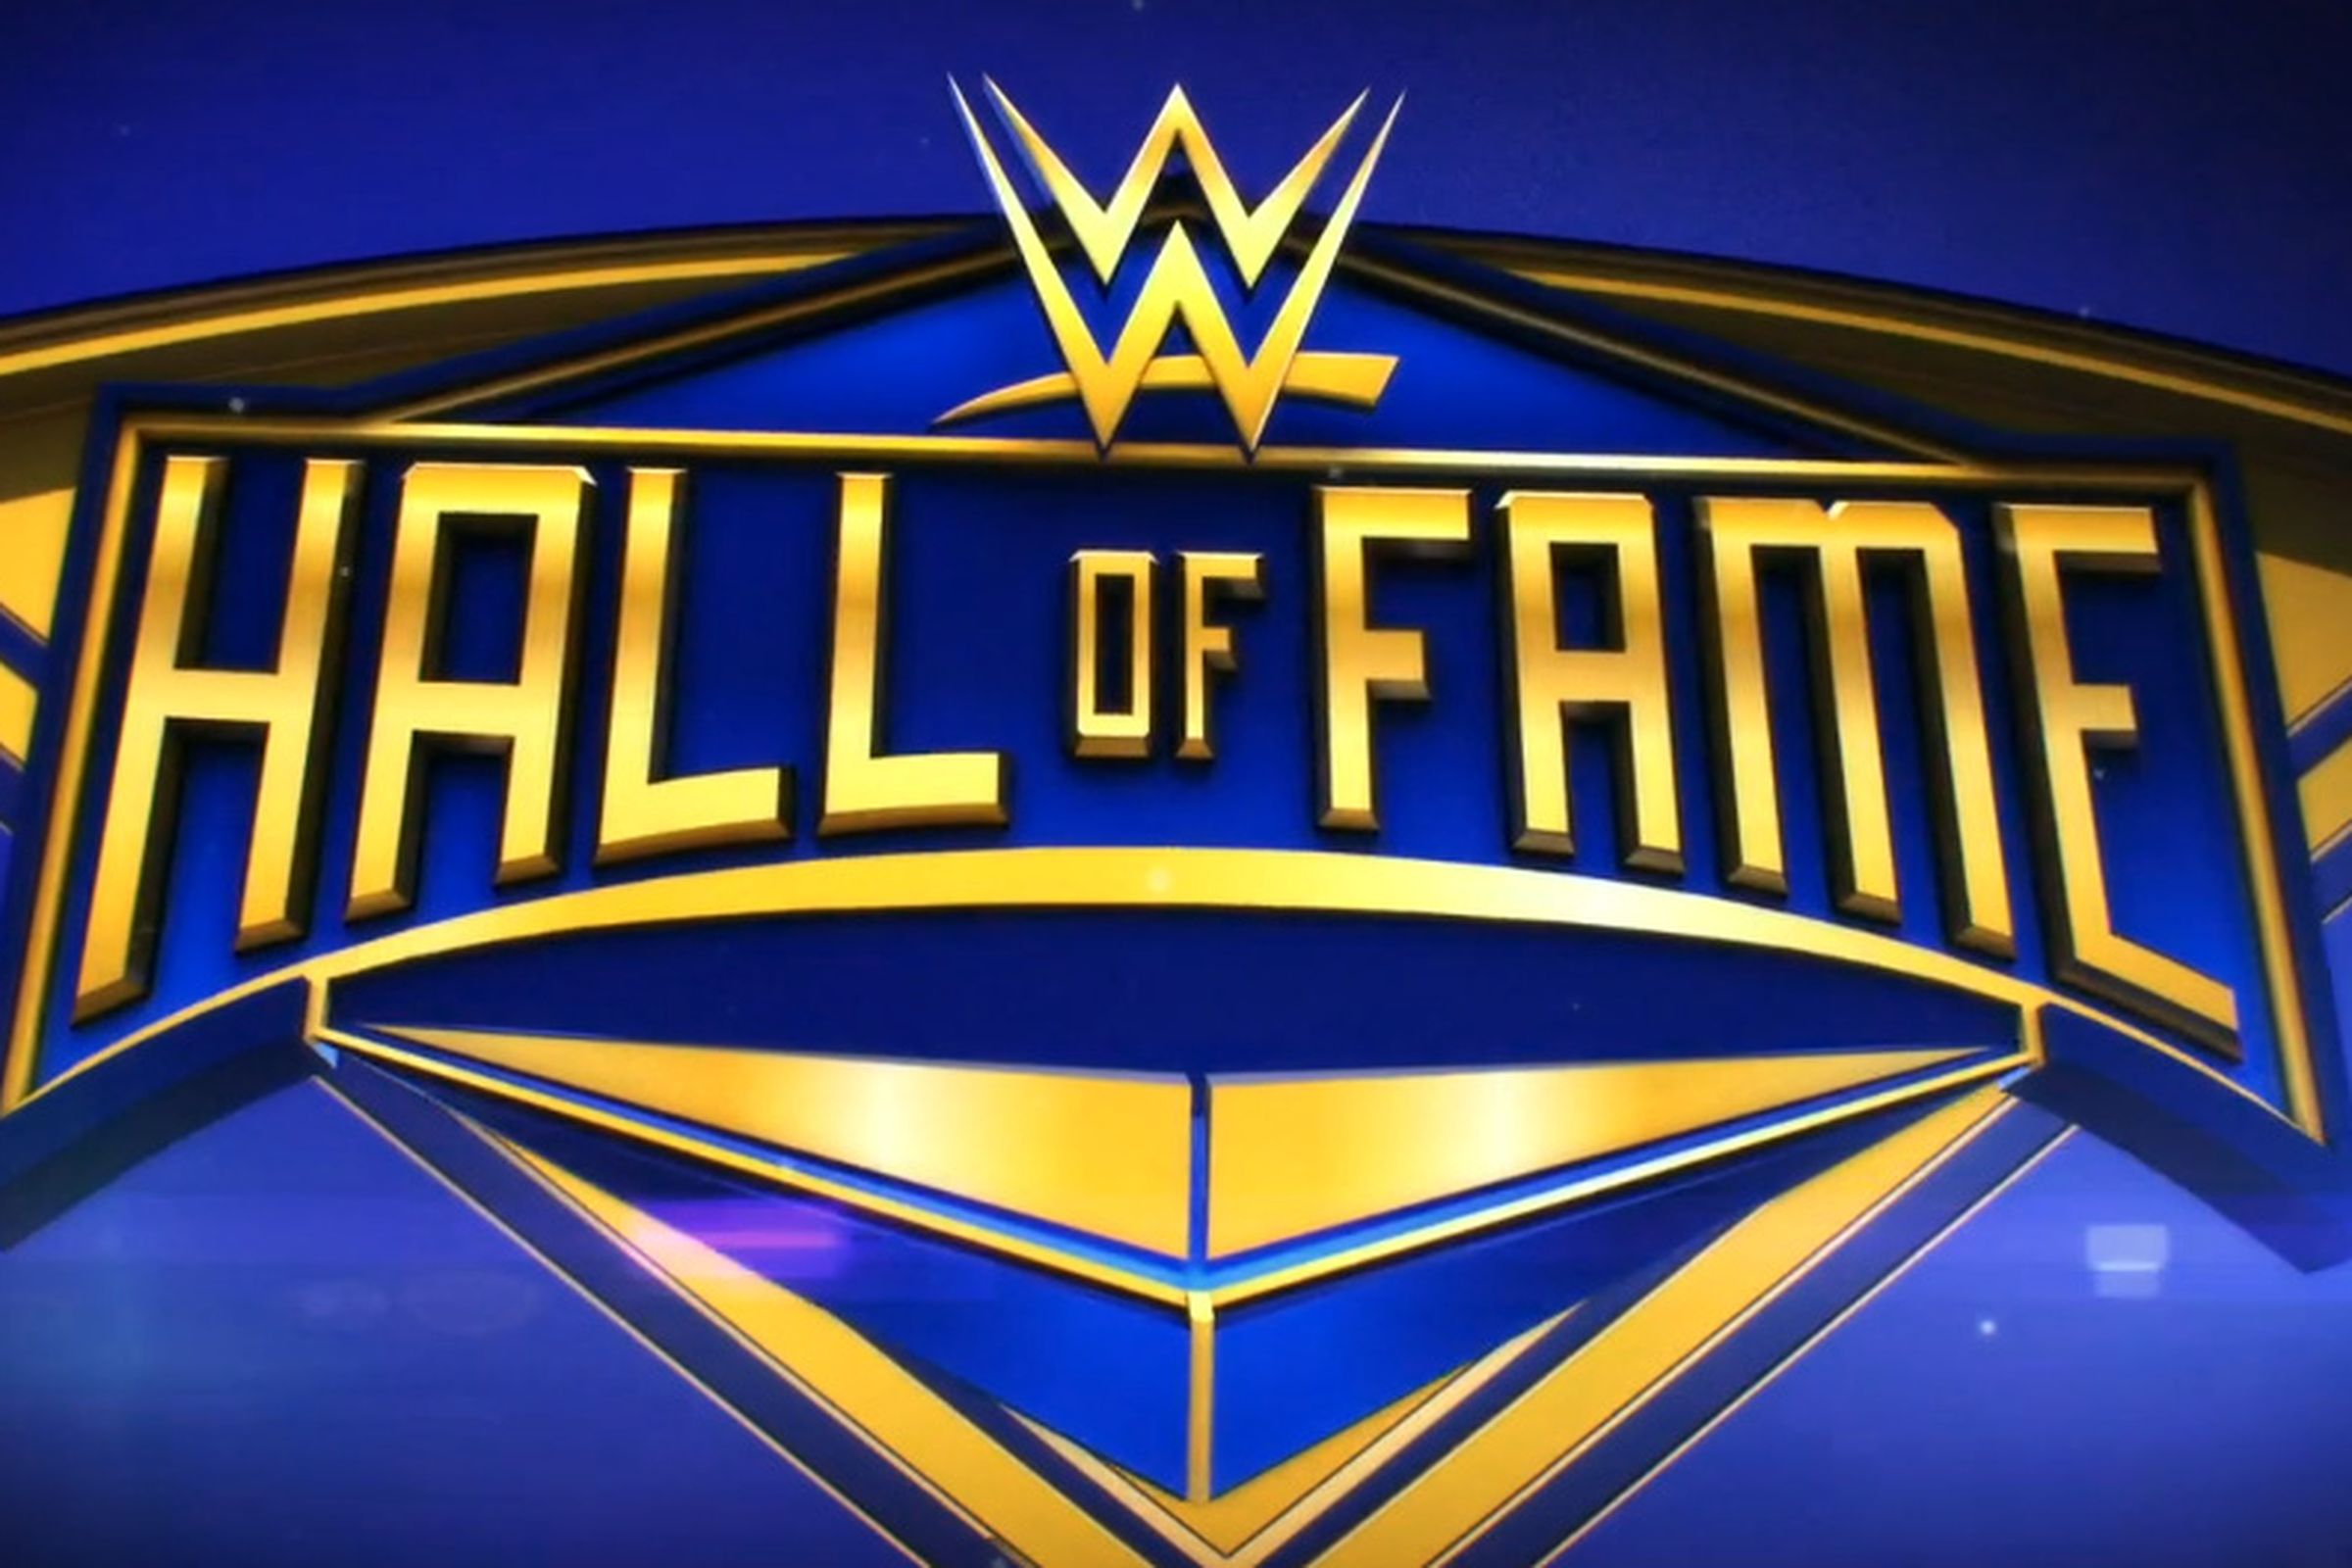 Wrestlemania xl. WWE Hall of Fame. Hell game. 4090 Hall of Fame. Hall of Fame logo.